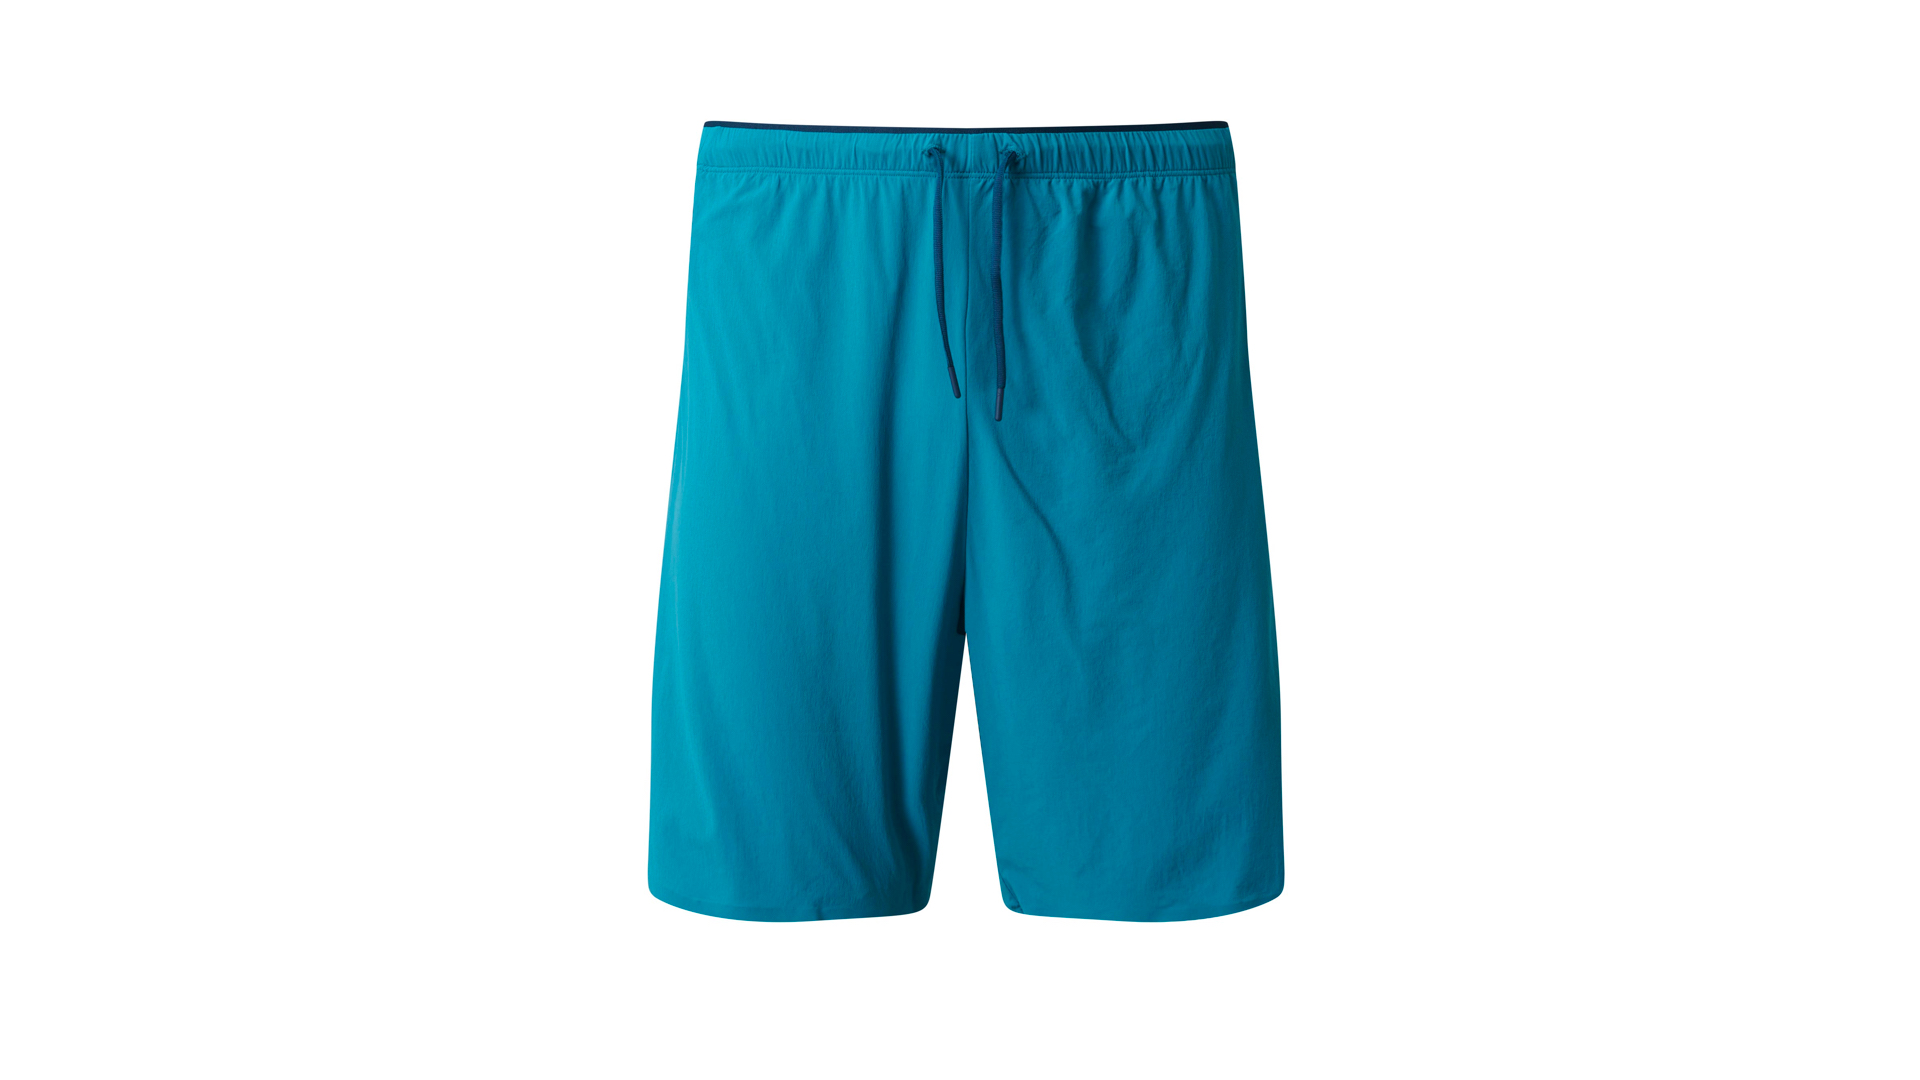 Rab Men's Talus Trail Light Shorts. Lightweight Stretch Running Shorts with  Liner.